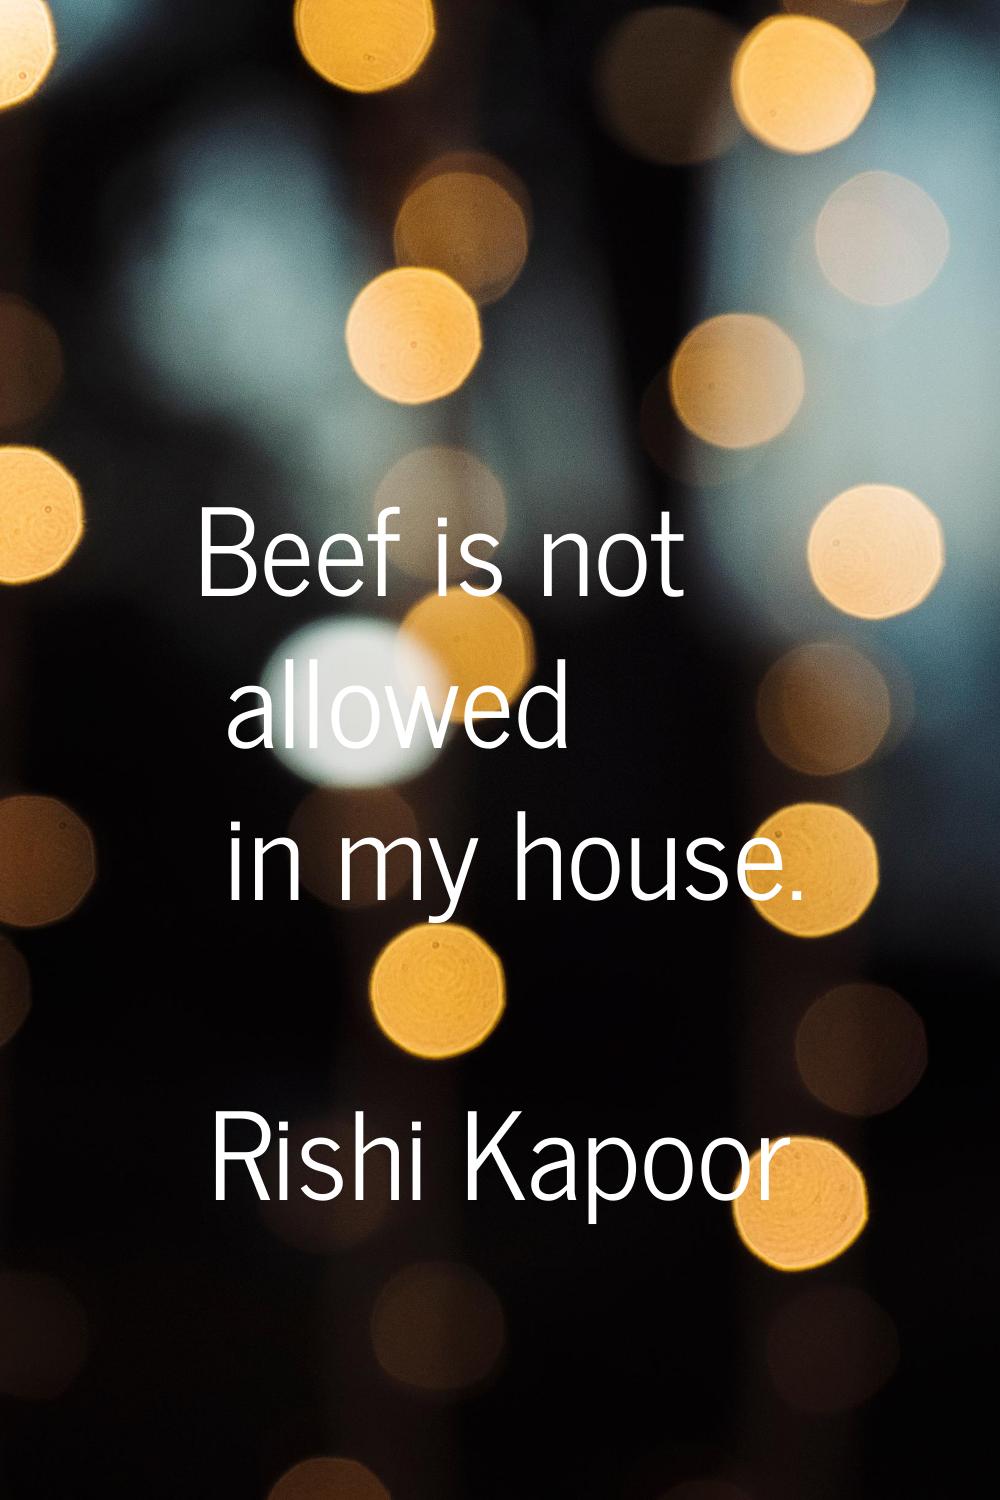 Beef is not allowed in my house.